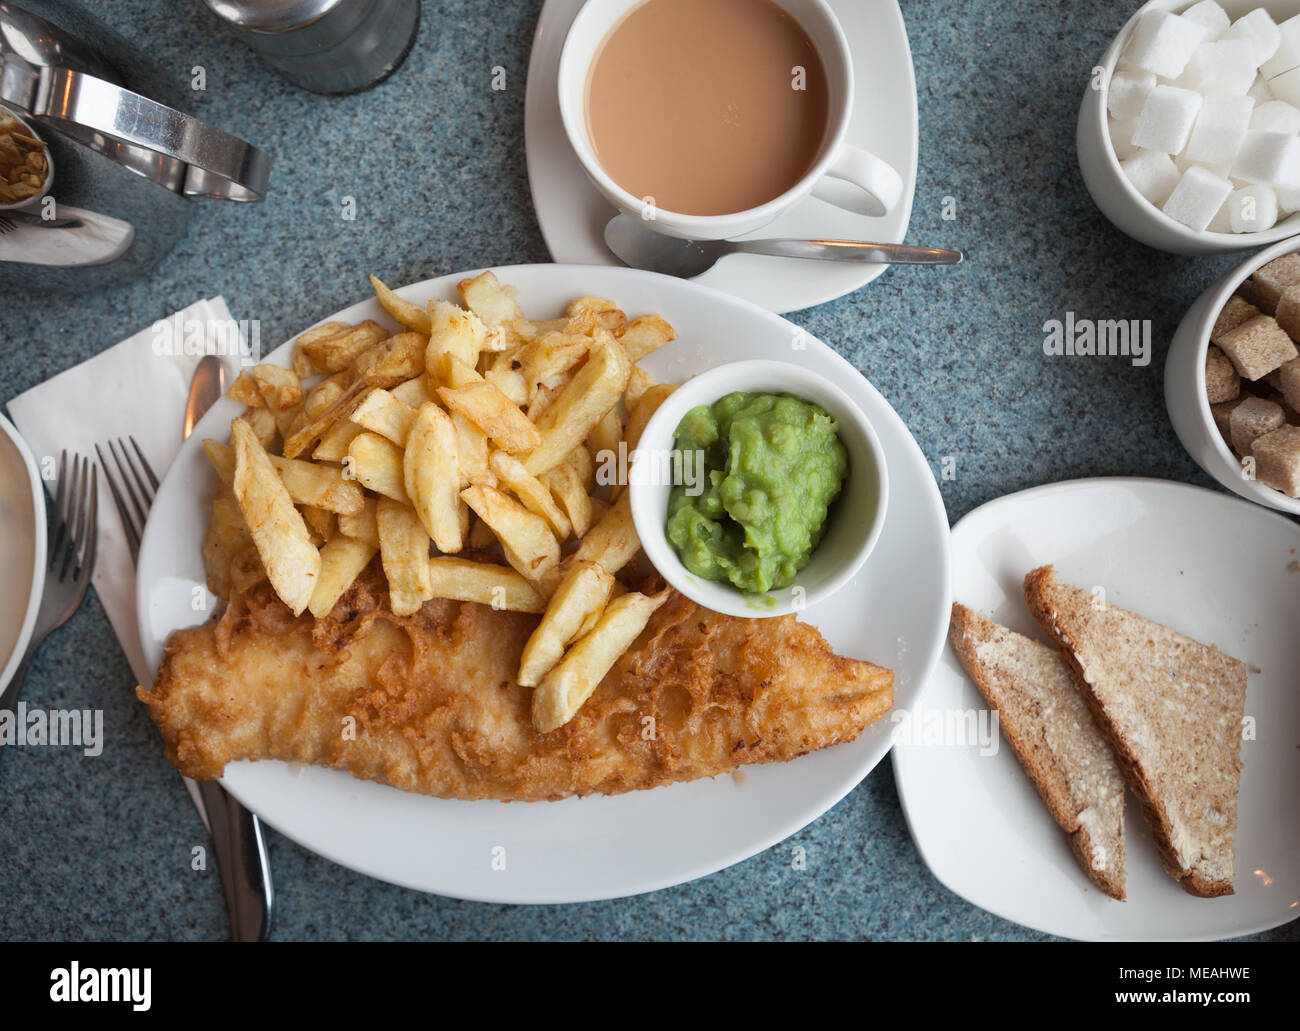 Authentic British fish and chips, with mushy peas, buttered bread and a cup of tea Stock Photo